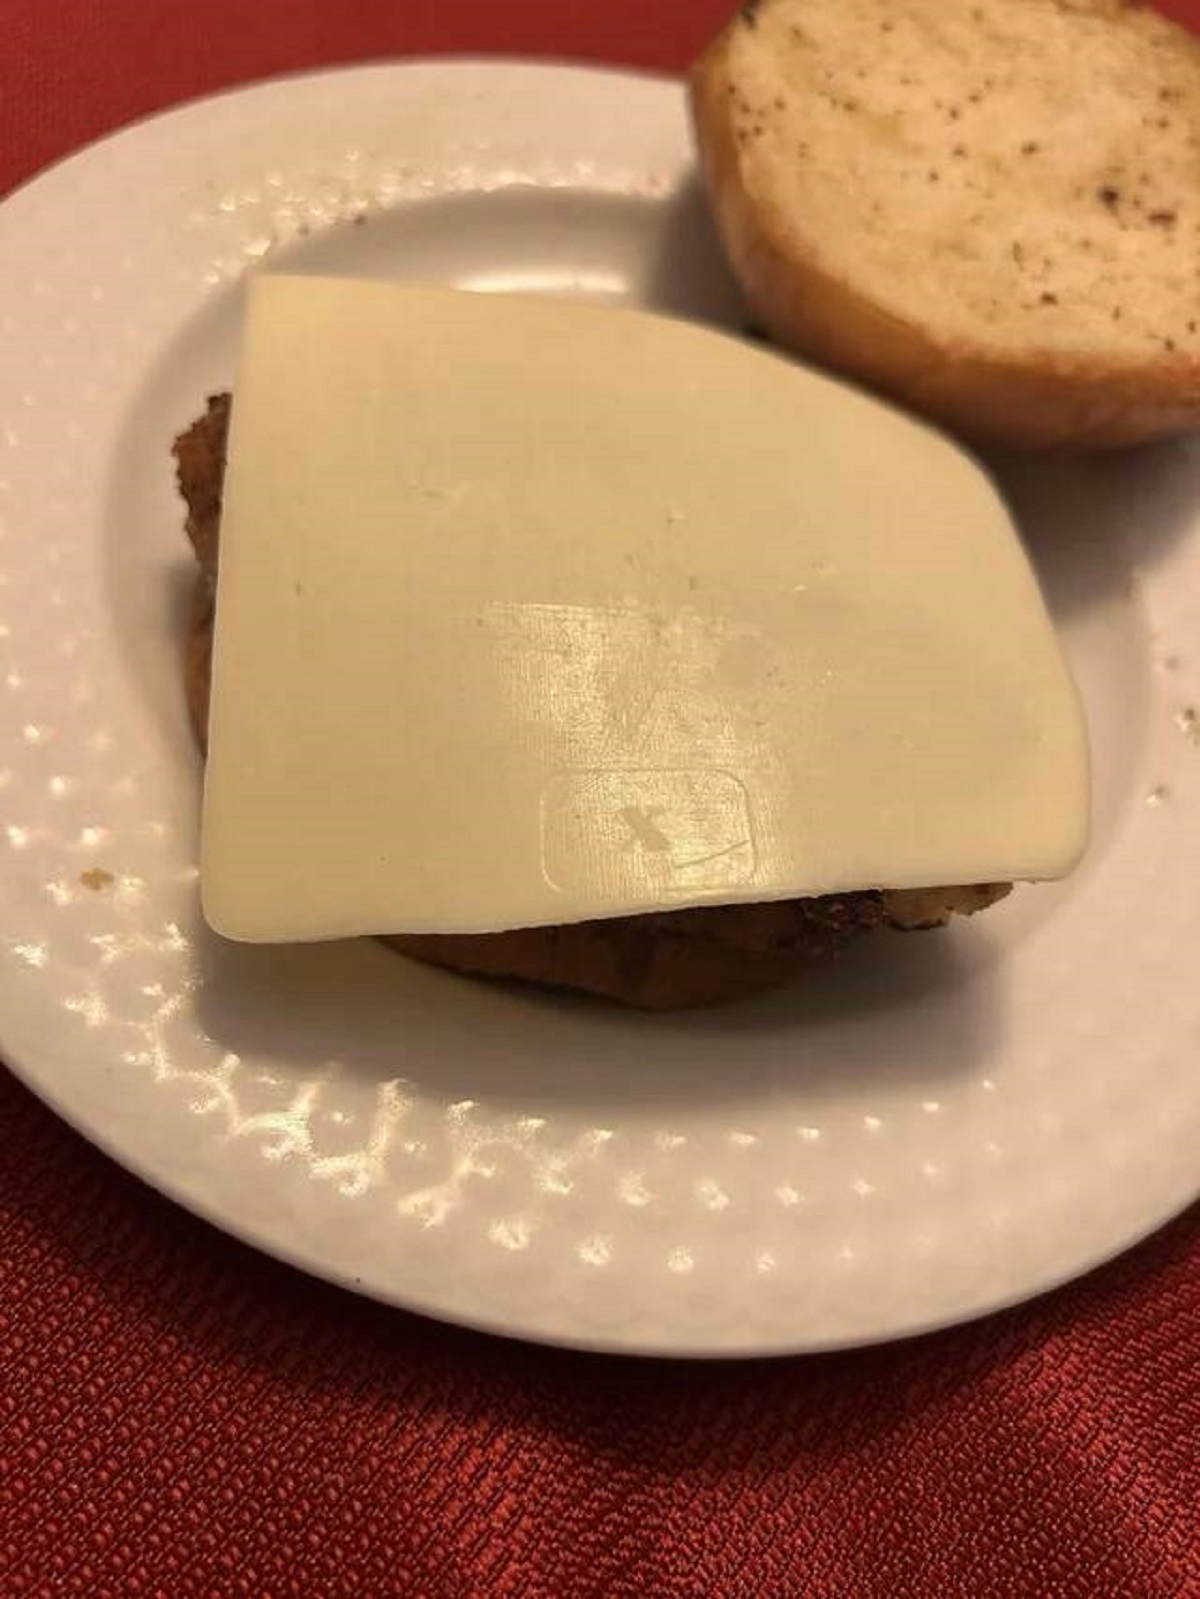 "My piece of cheese has an “x” printed on it (mozzarella)"